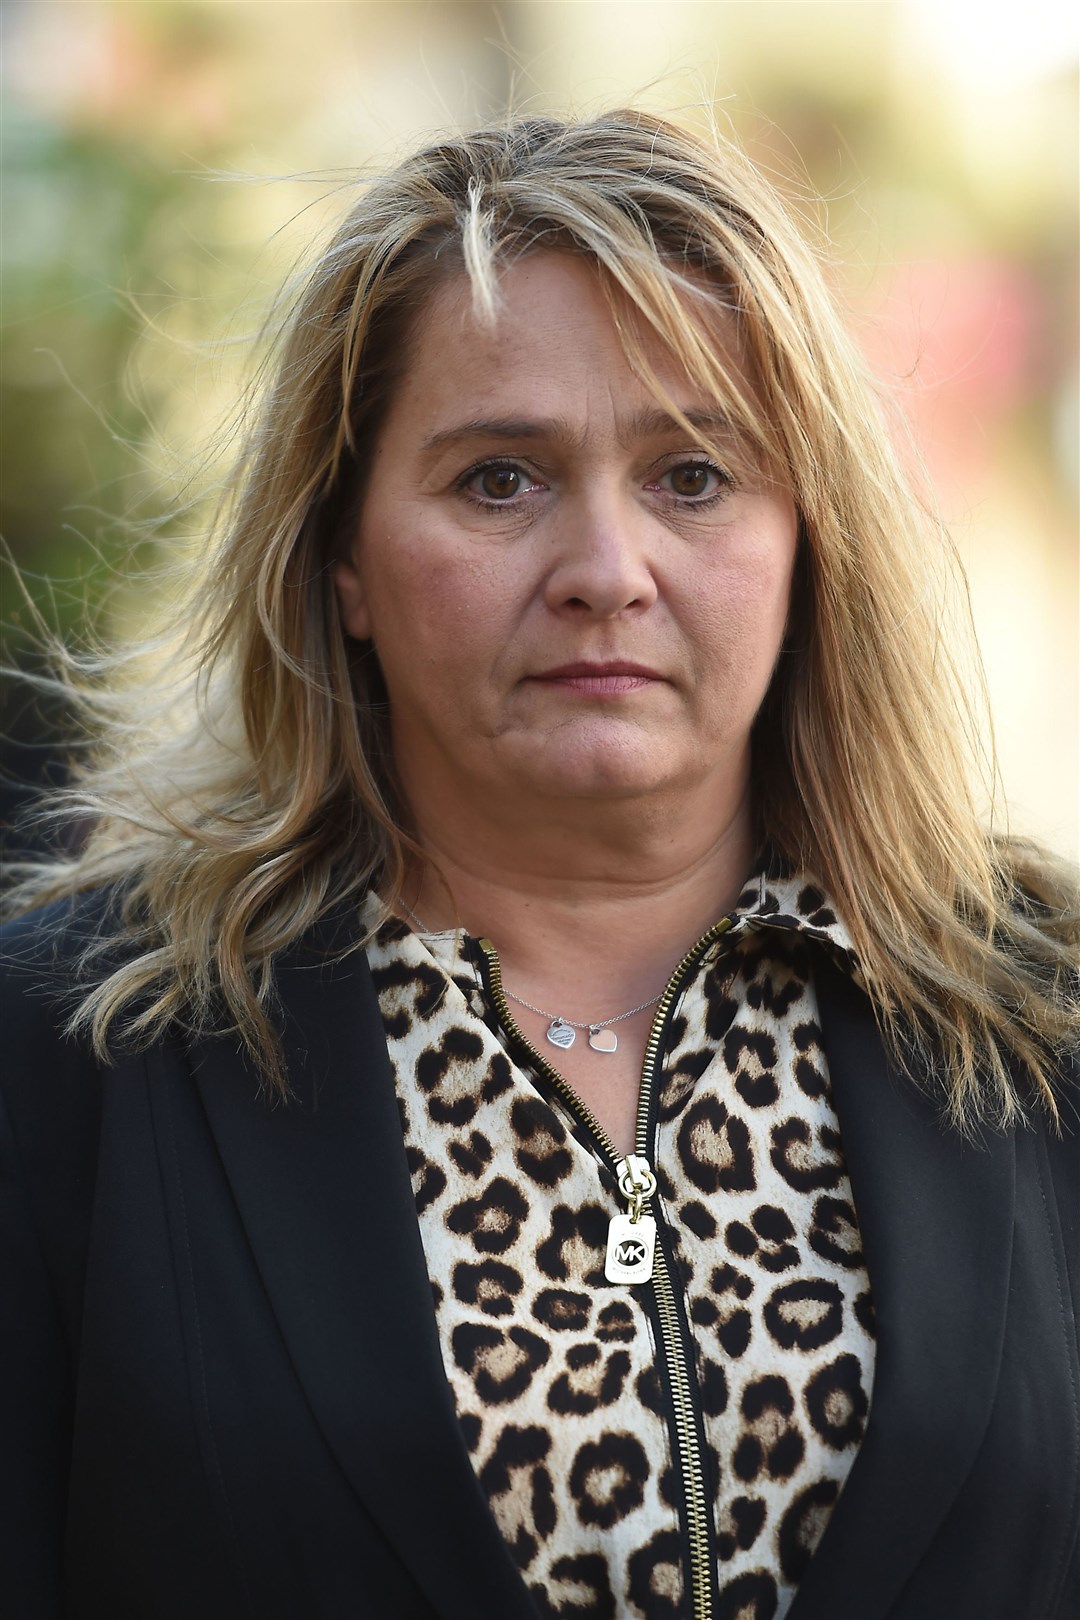 Nicola Urquhart, mother of RAF gunner Corrie McKeague, told of her ‘rage’ that more is not being done over bin safety (Joe Giddens/ PA)